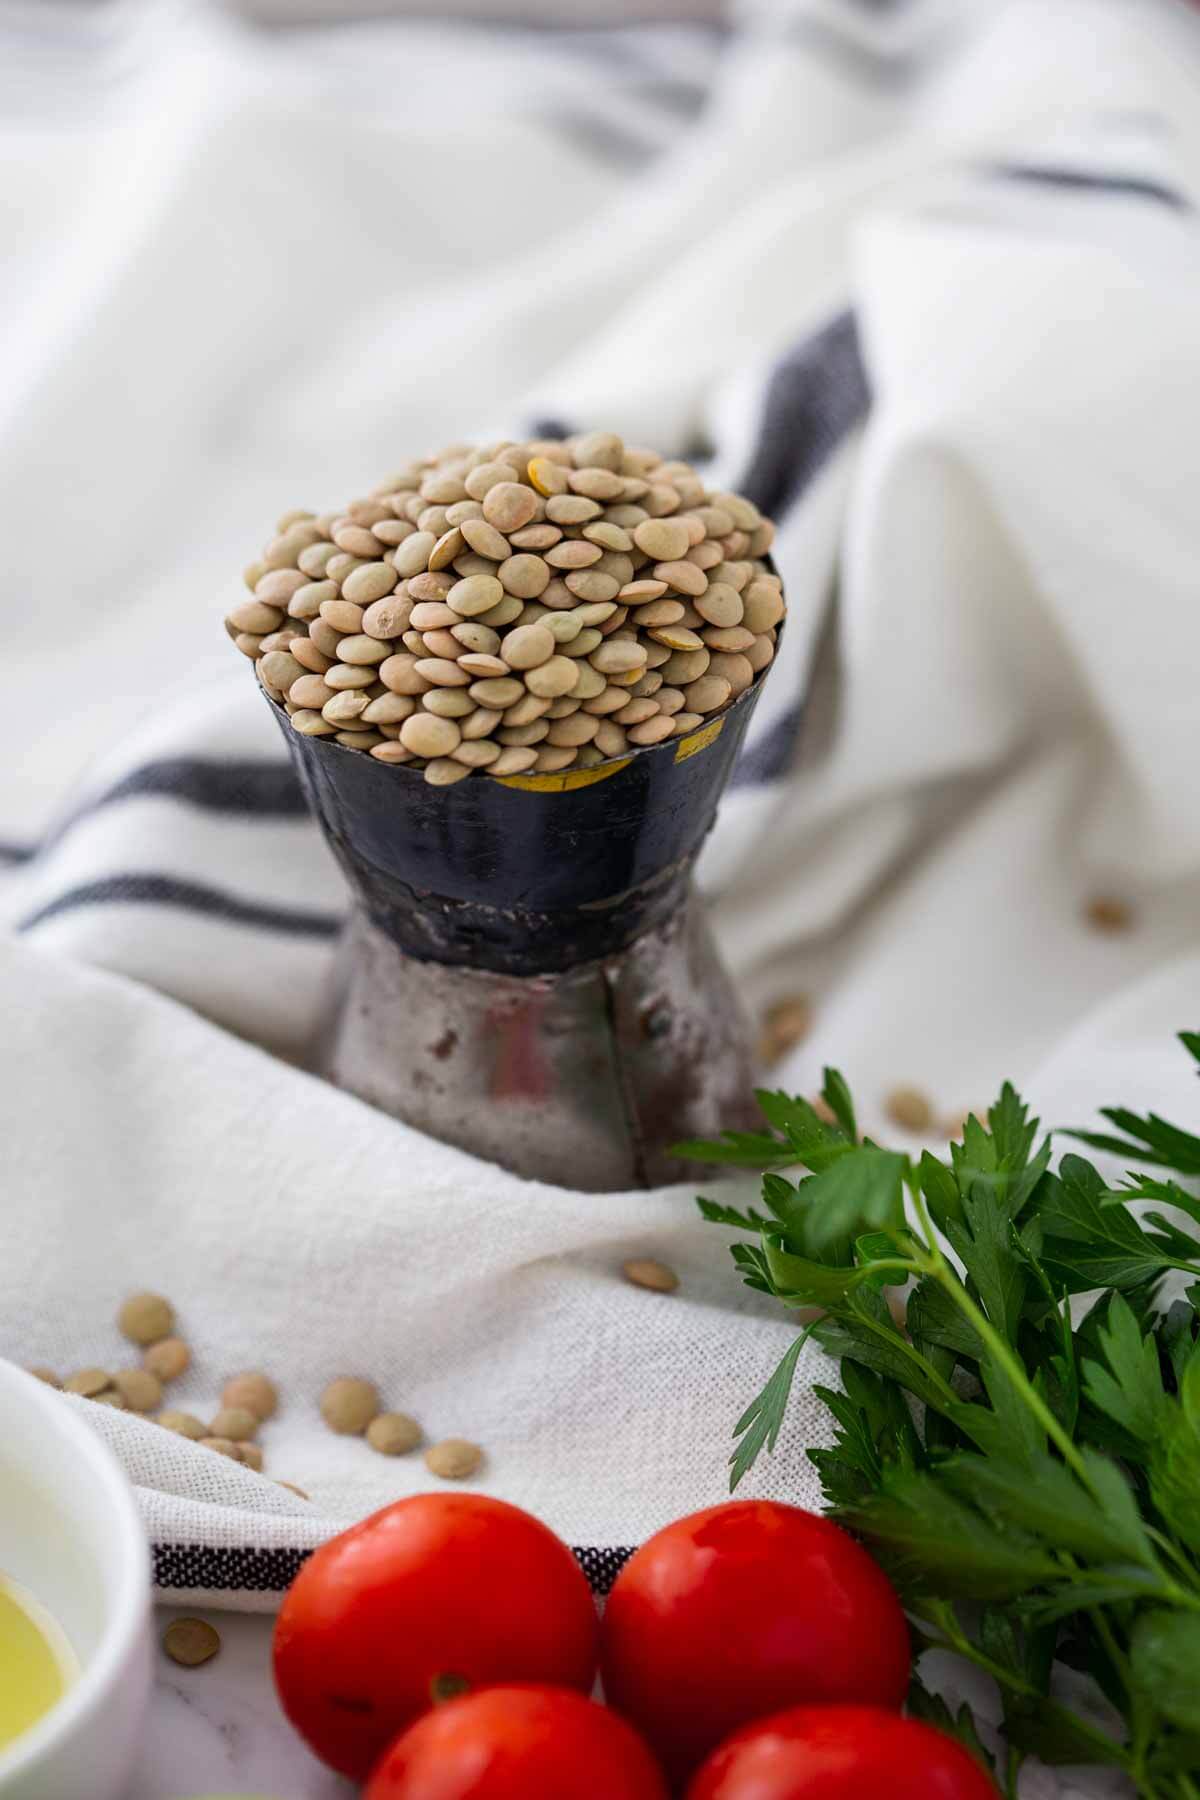 Raw lentils in a metal container with fresh parsley and tomato on the side.